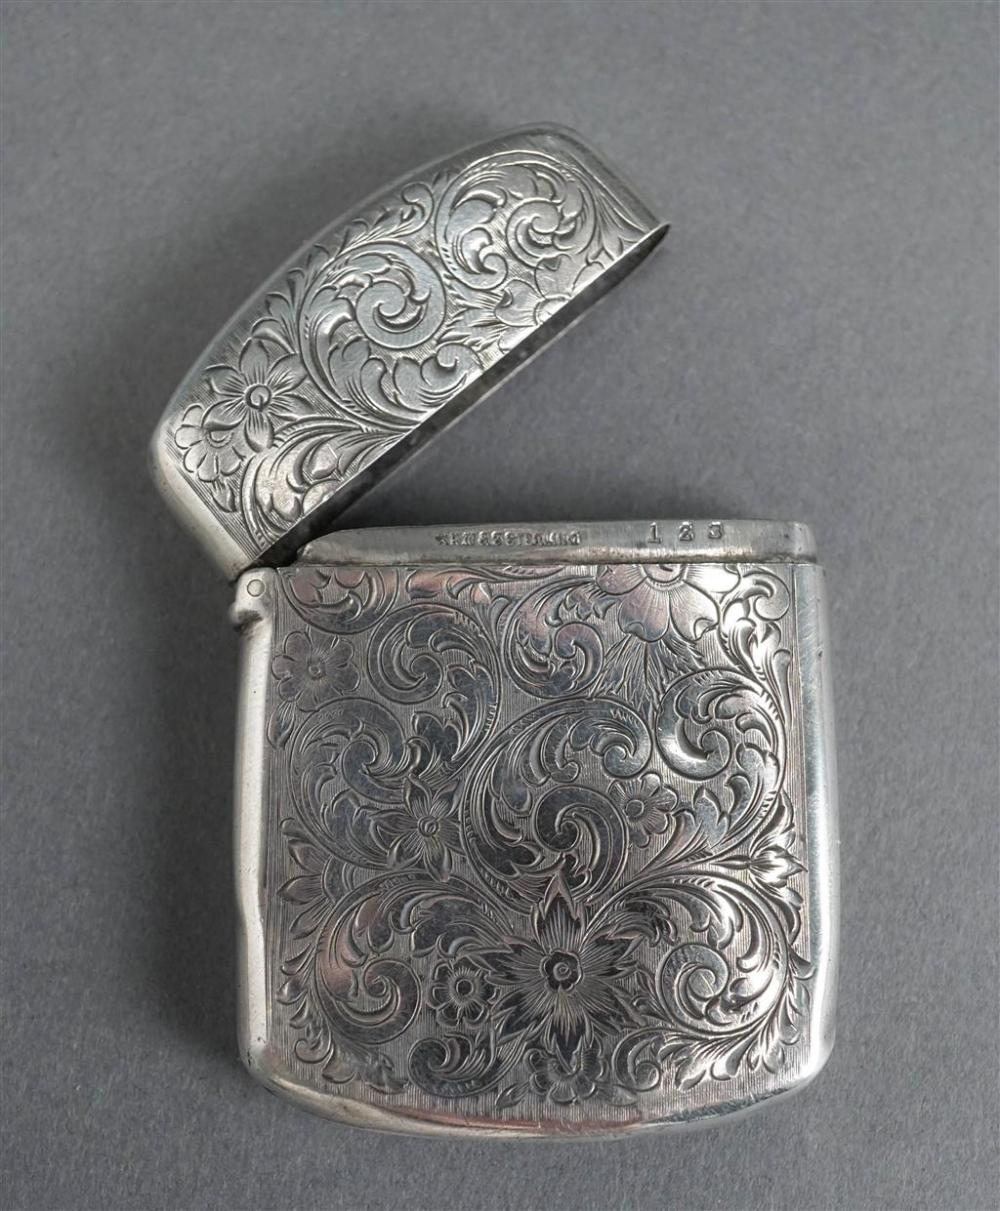 WALLACE STERLING SILVER MATCH SAFE,